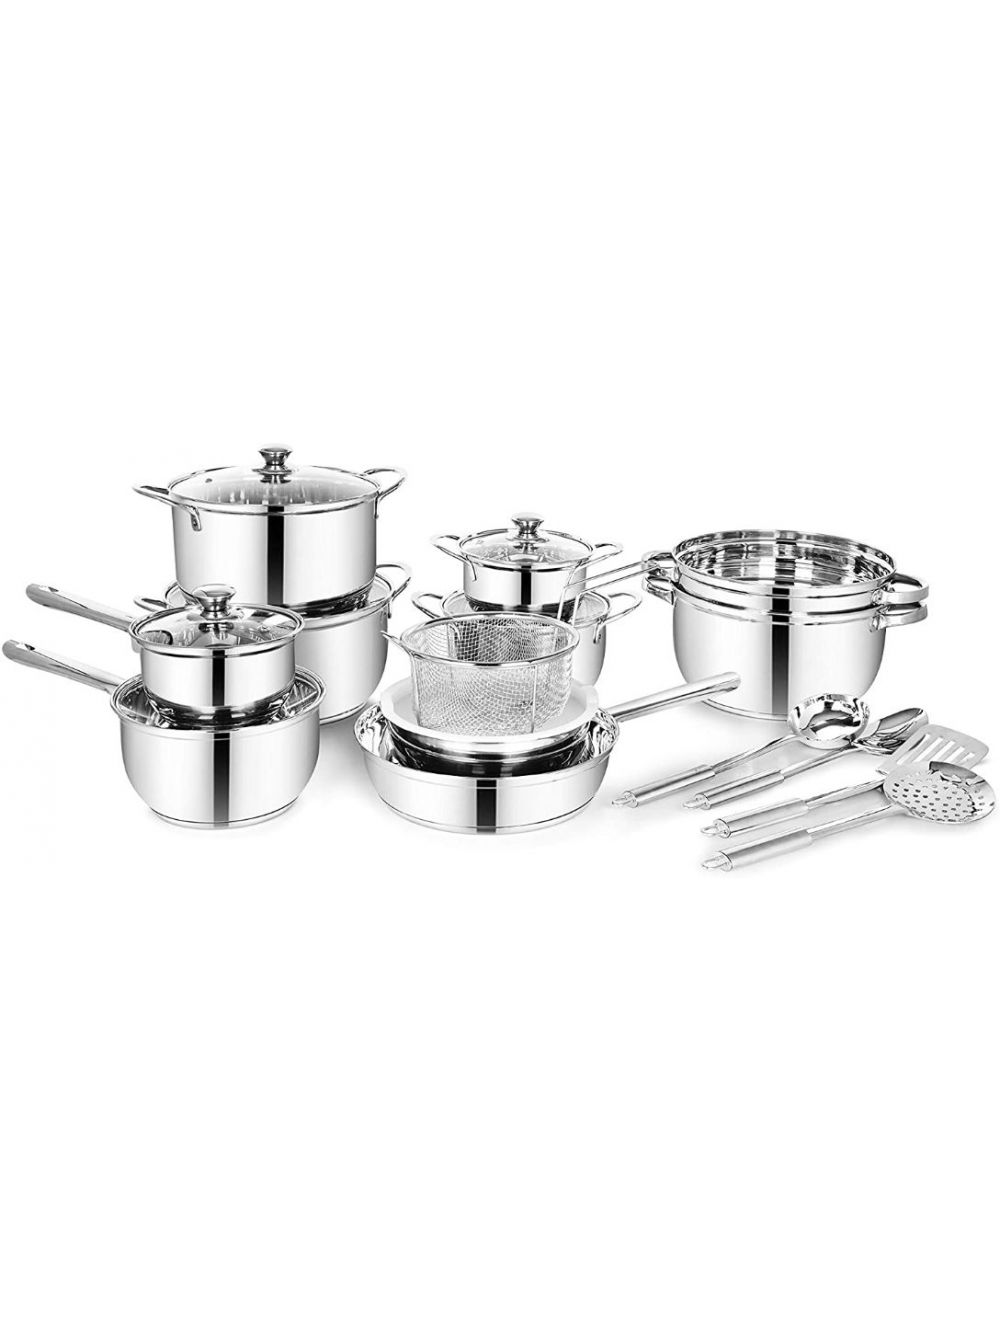 Classic Essentials 21-Piece Supreme Stainless Steel Cookware Set Silver-CE-SV21